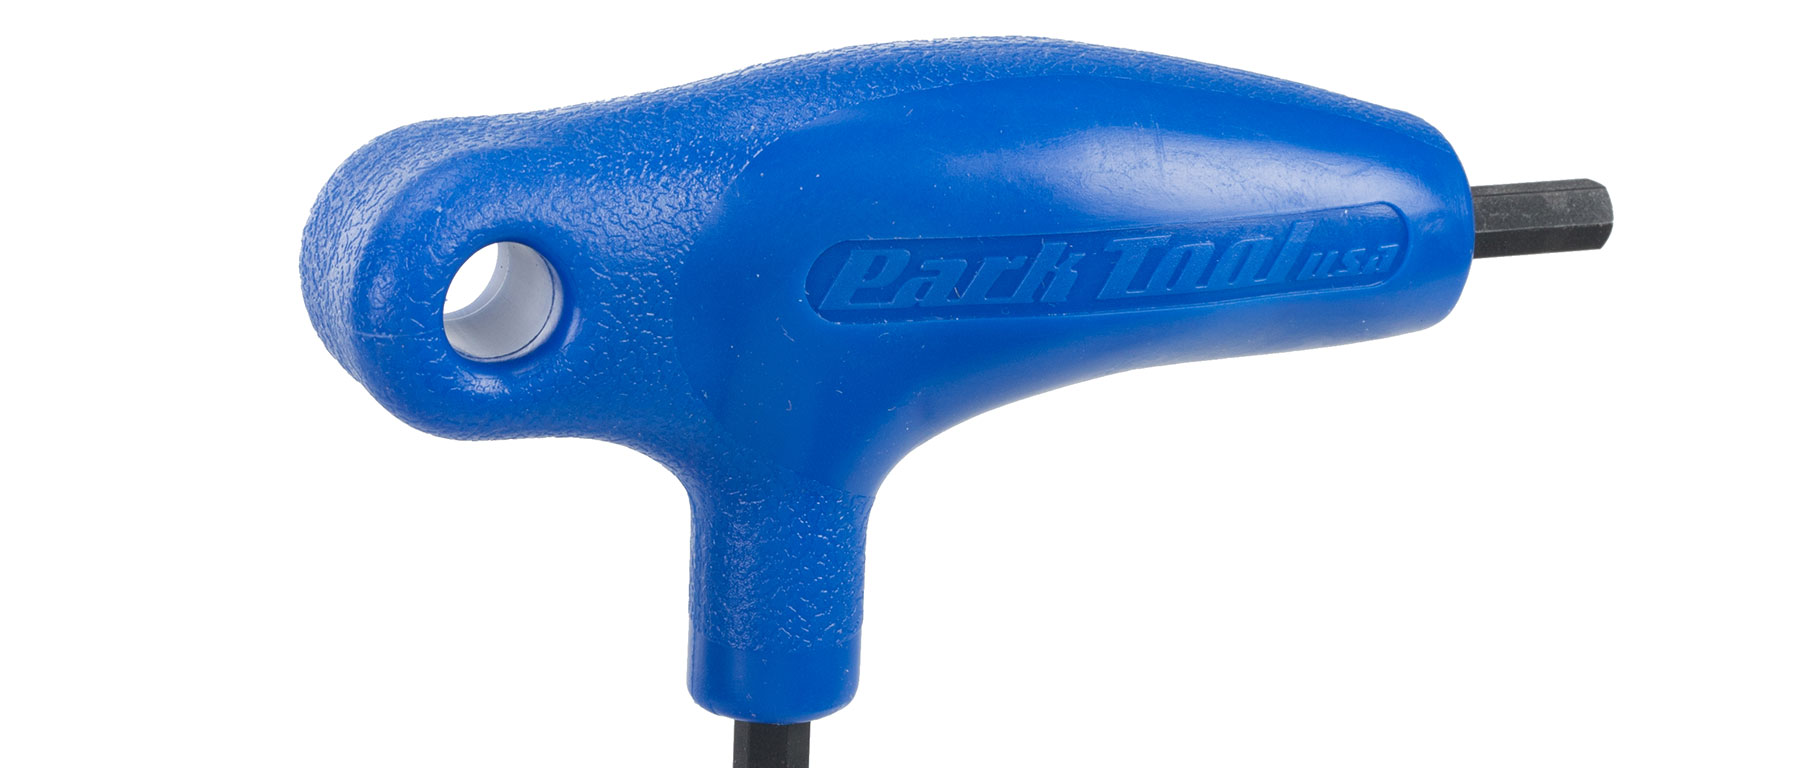 Park Tool PH P-Handled Hex Wrench